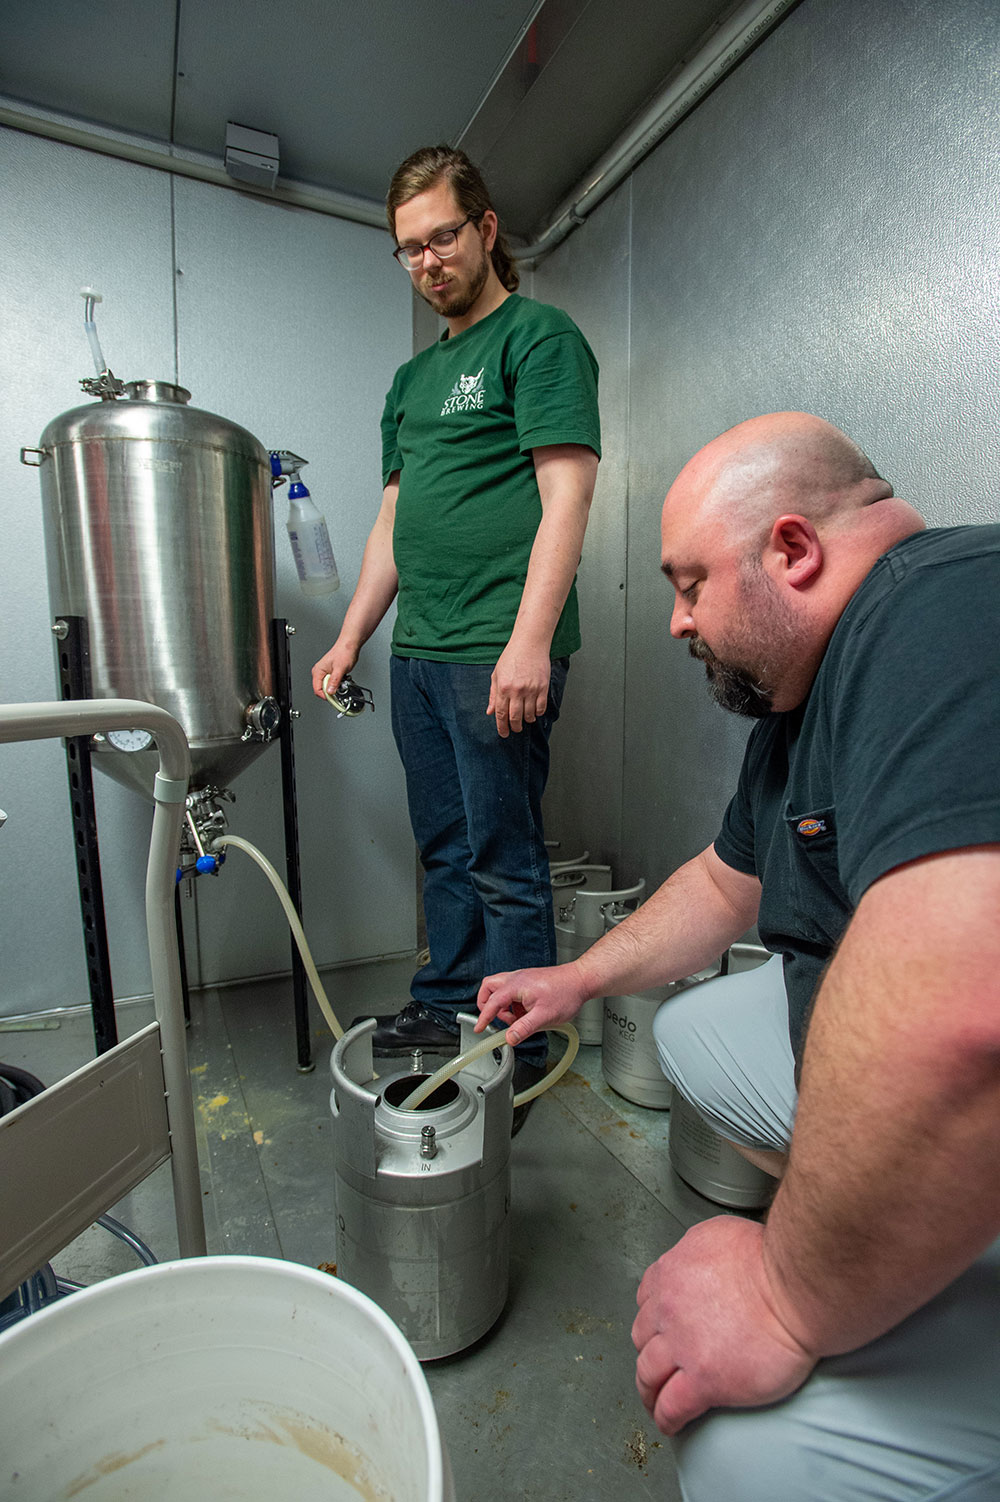 SIU Fermentation Science Student puts beer into a keg